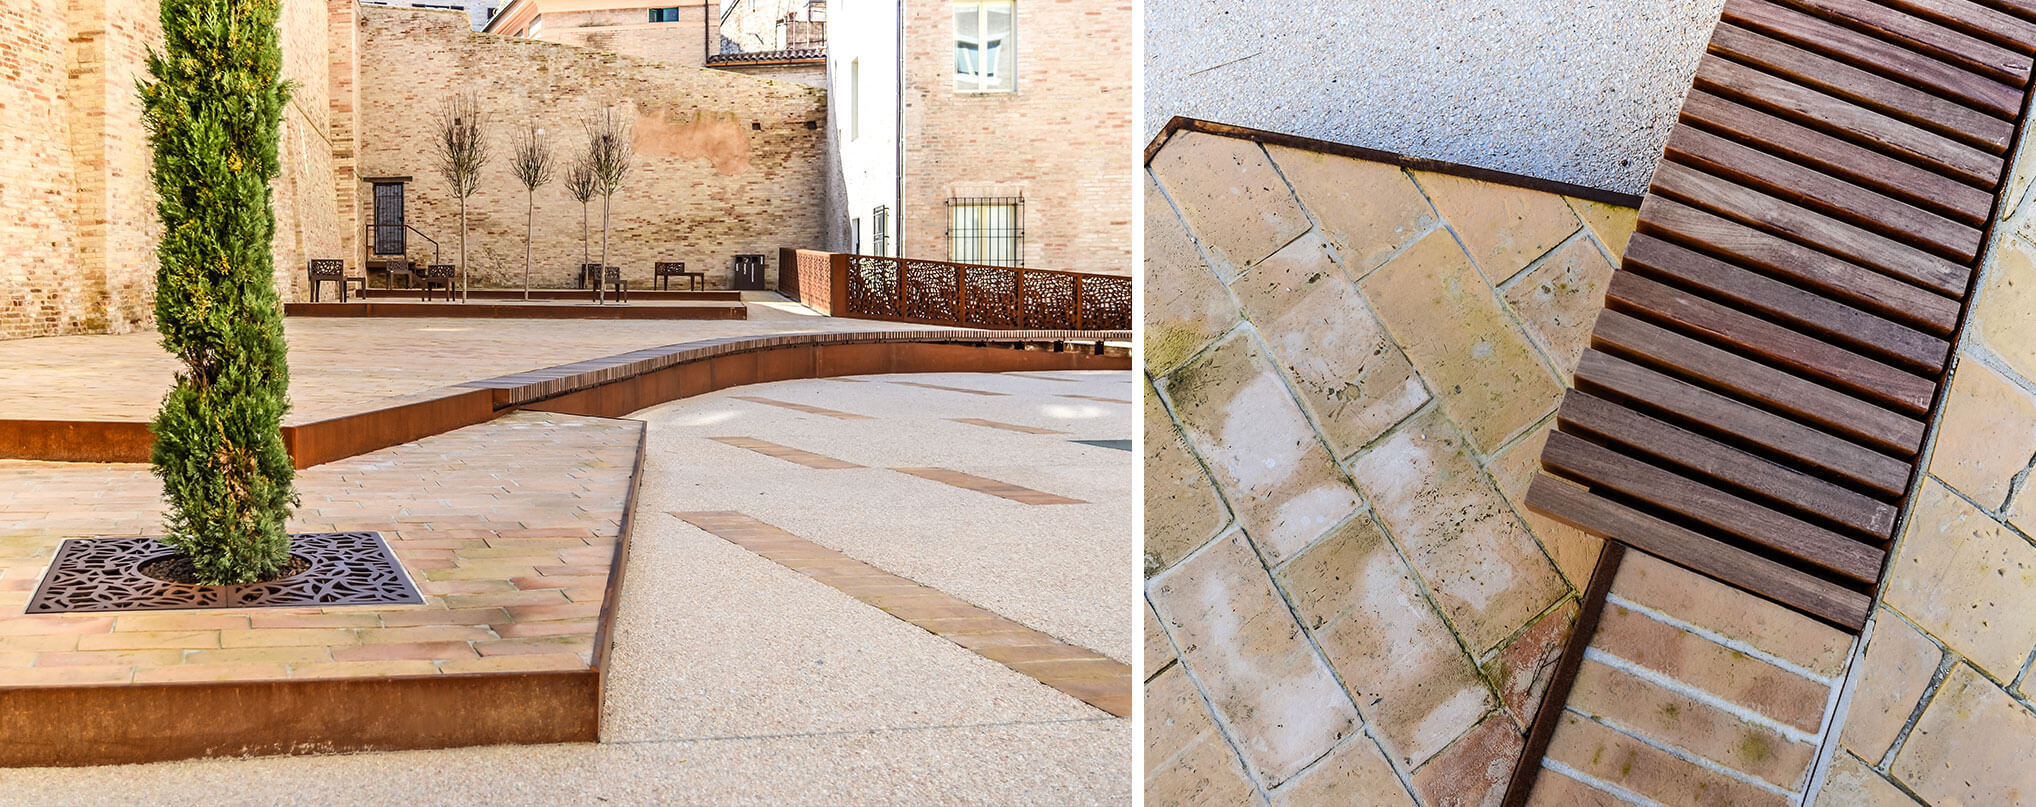 corten borders highlight the play on altimetry of the courtyard